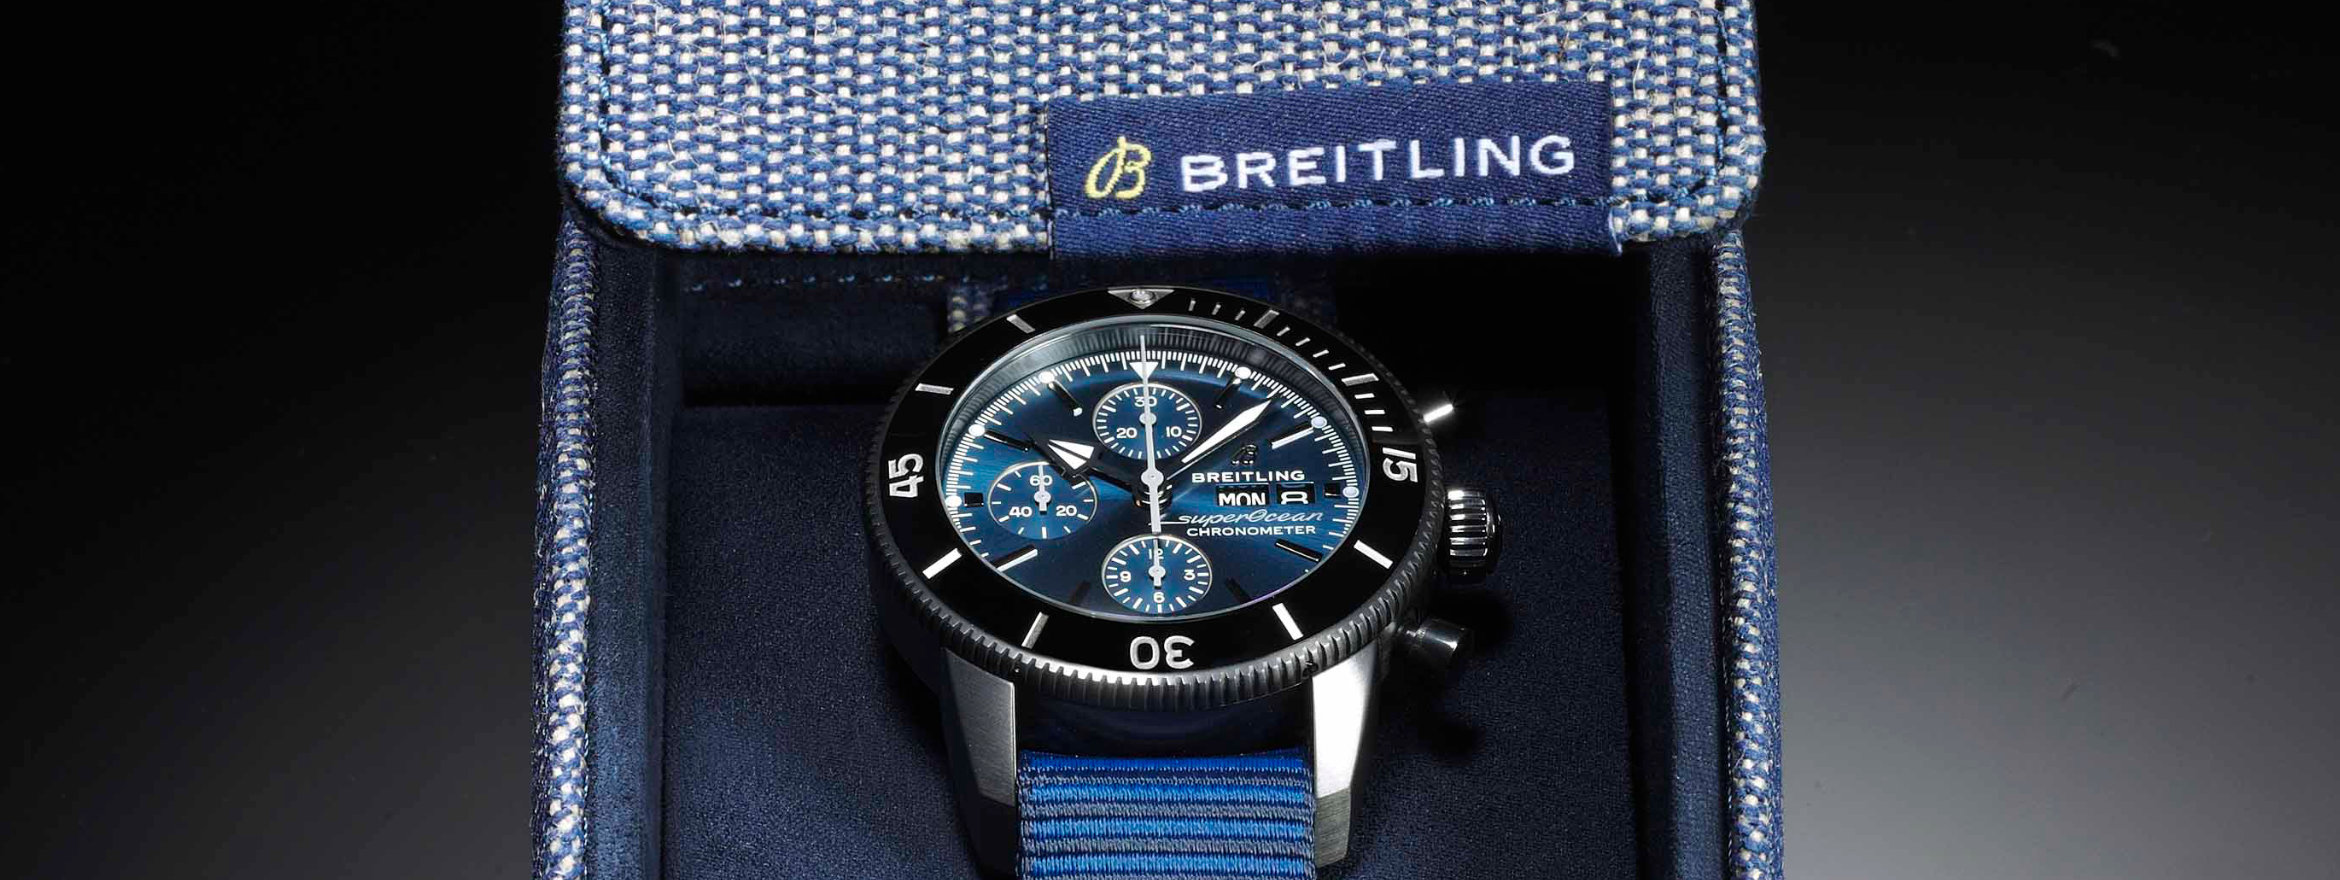 Making Waves with the Breitling SuperOcean